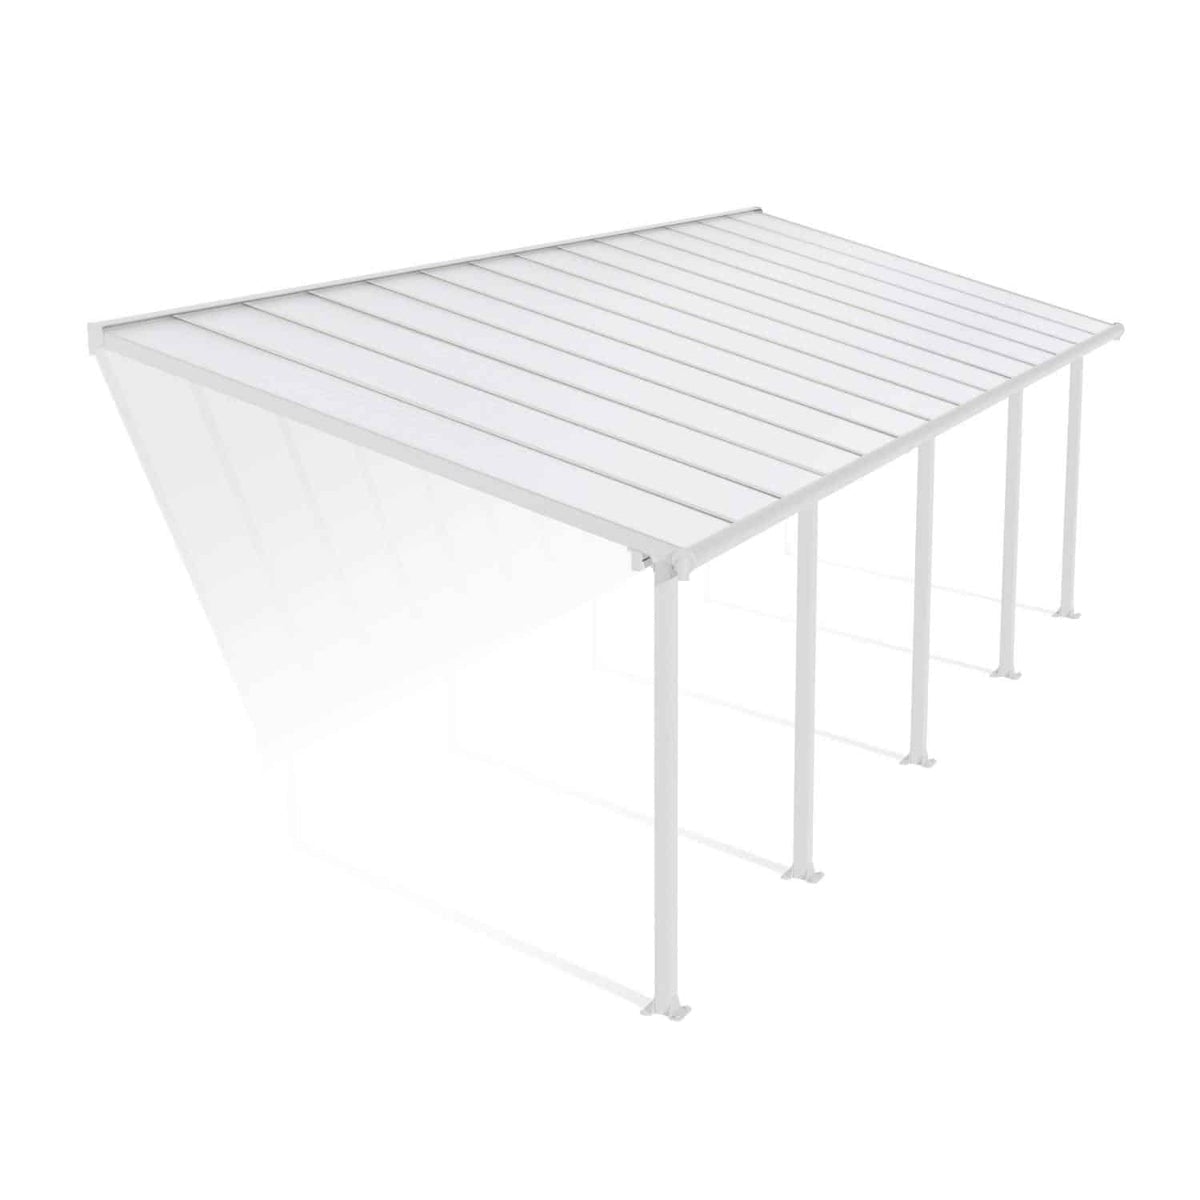 Olympia Patio Covers 10 x 28 ft. | Palram-Canopia - Delightful Yard